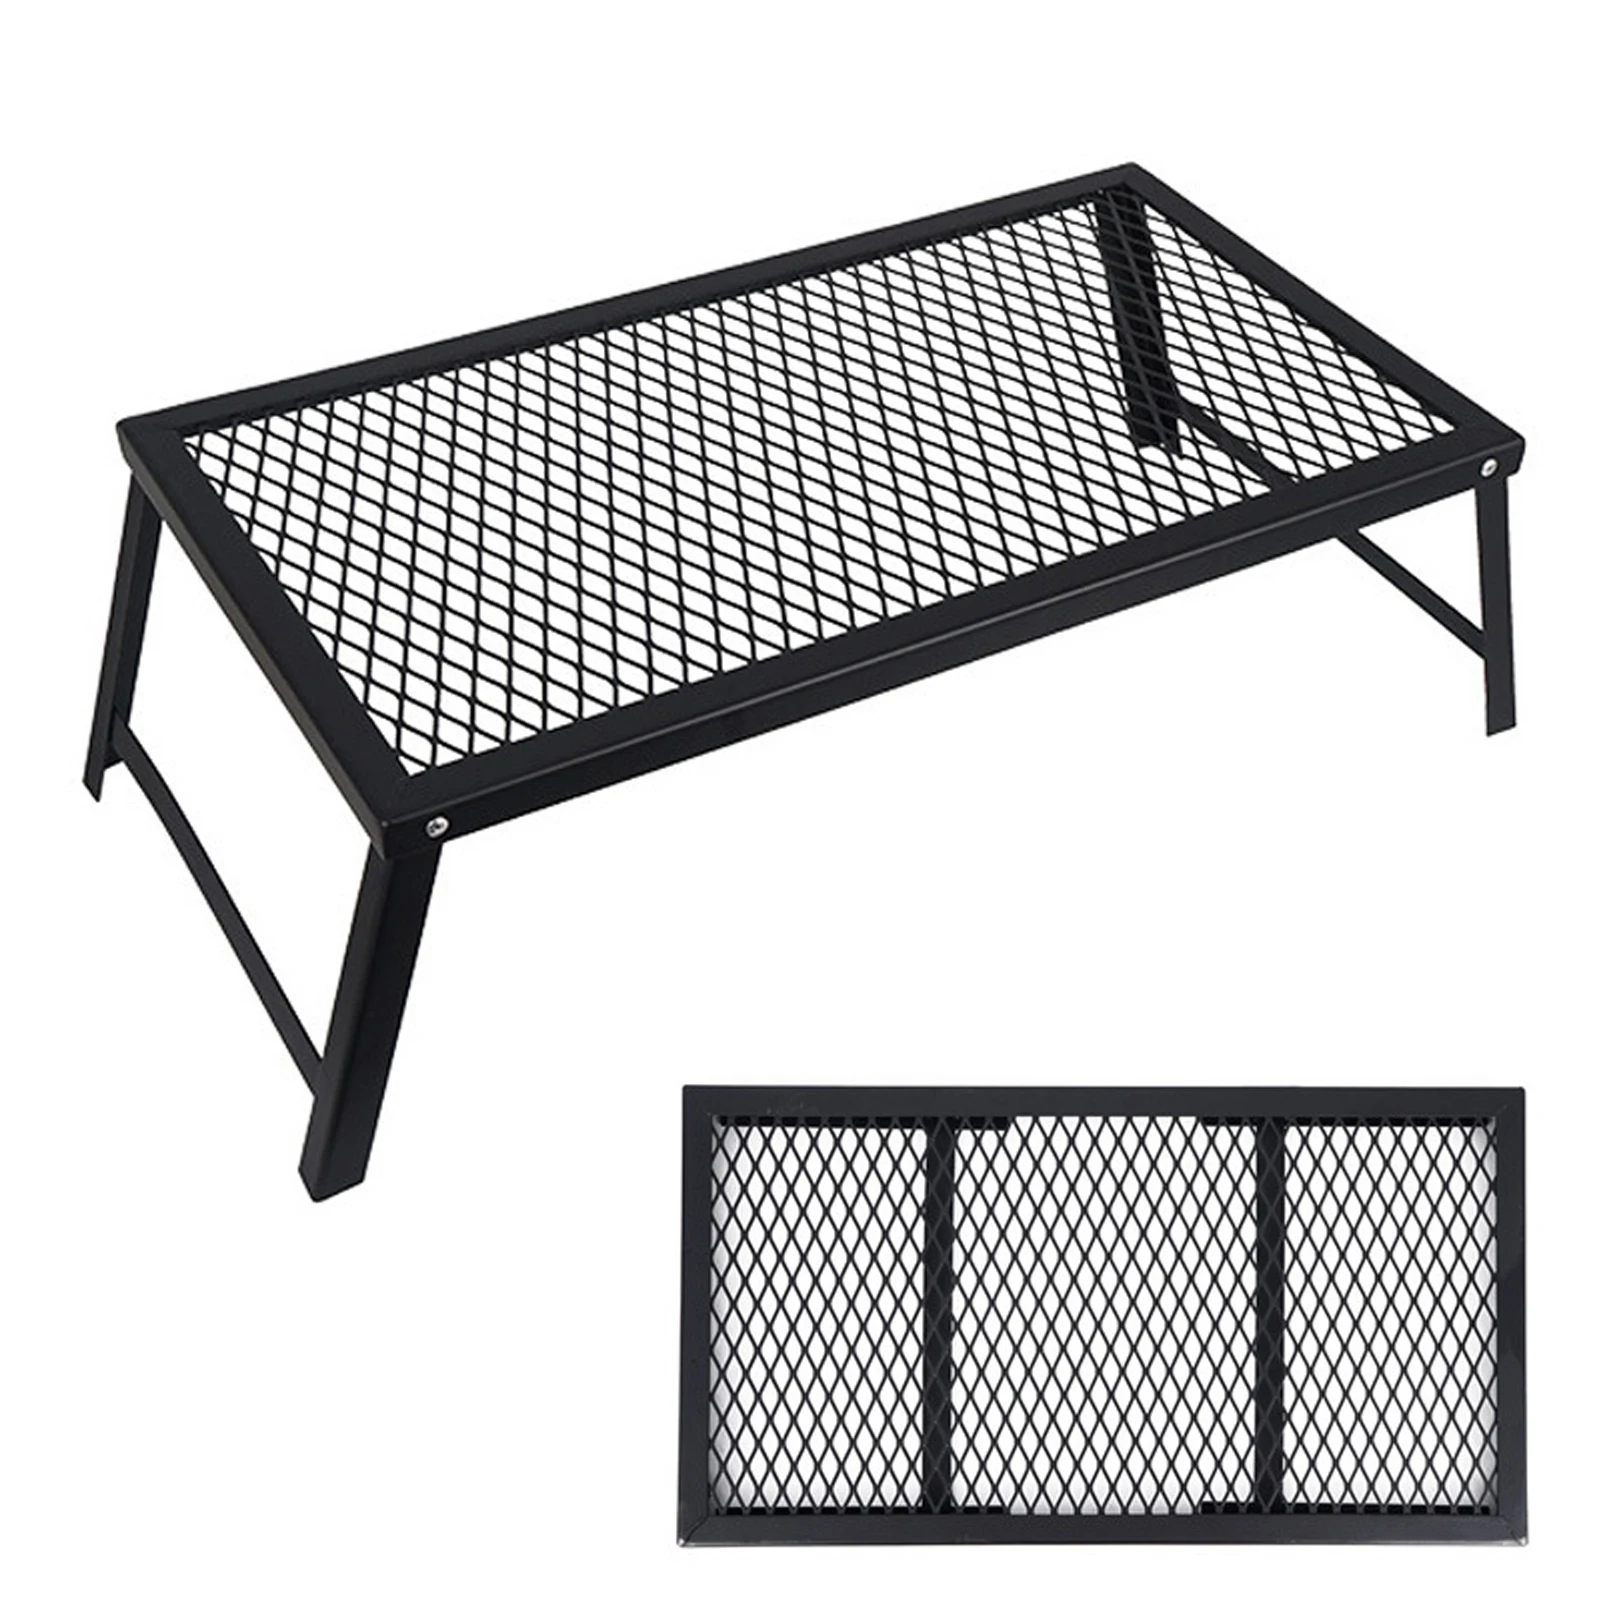 

Portable Camping Barbecue Mesh Folding Table Desk Picnic Grill Grate With Folding Legs BBQ Grill Rack Barbecue Campfire Table